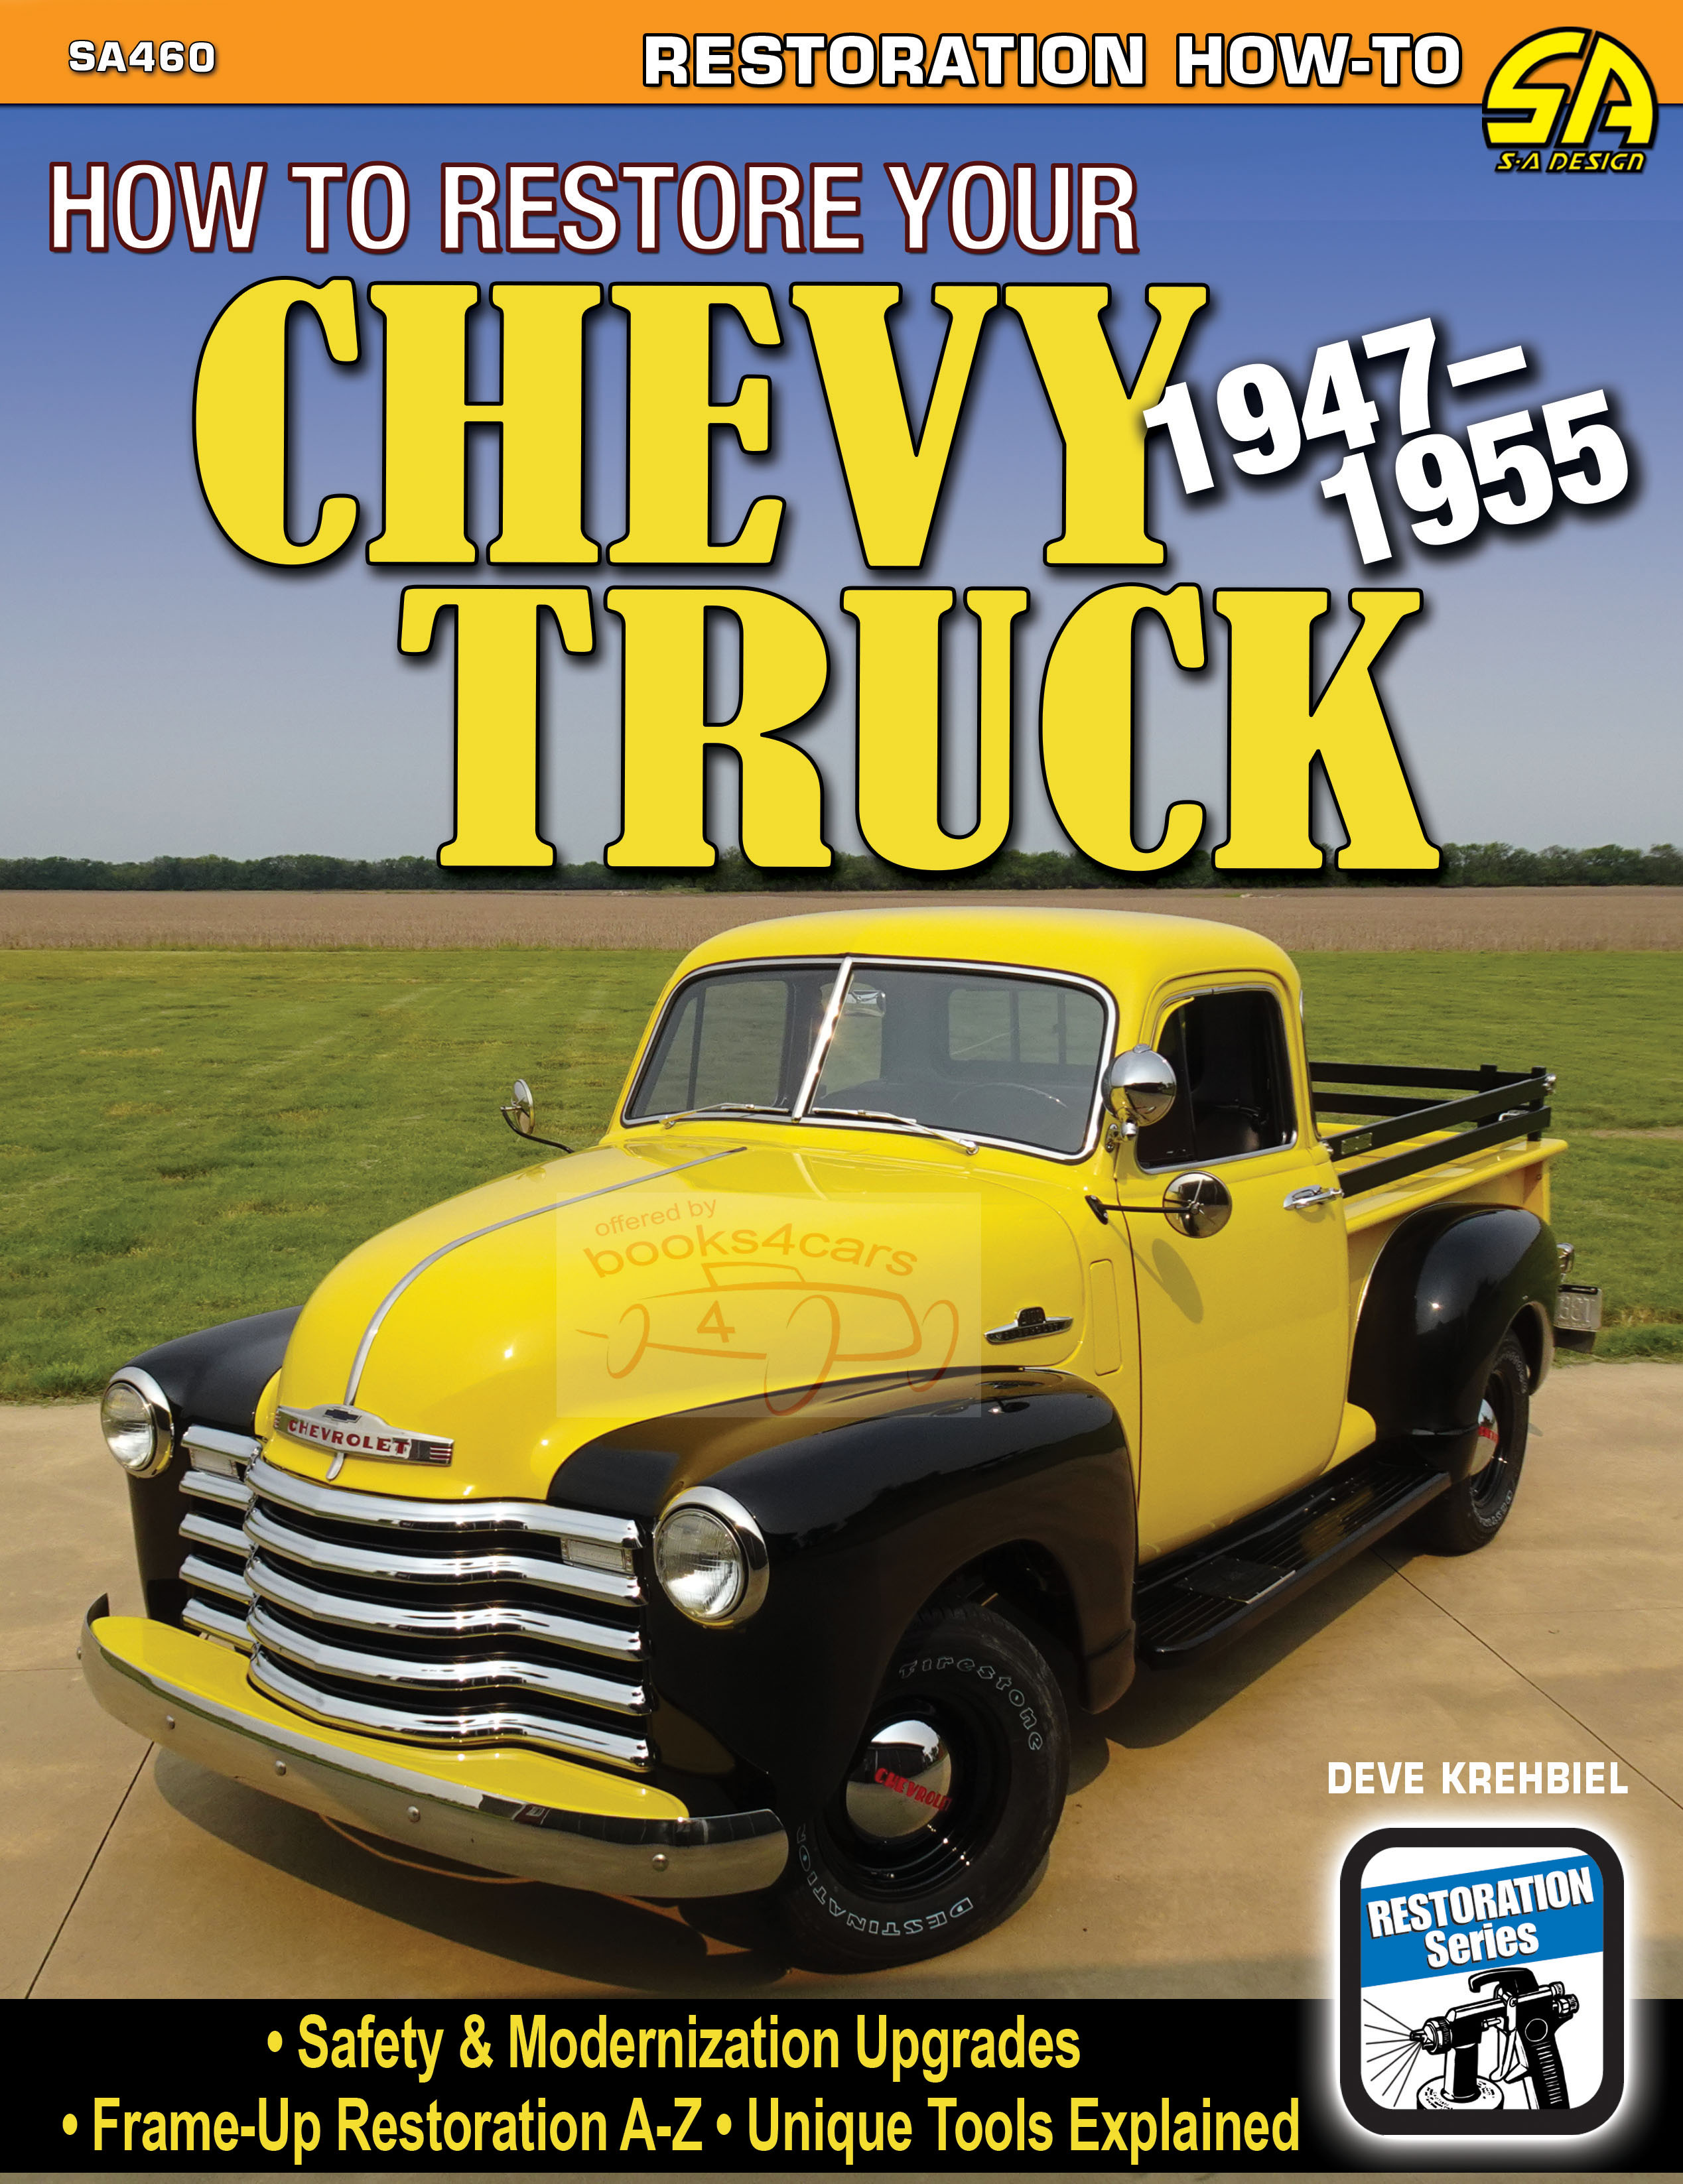 47-55 How to Restore Your Chevrolet & GMC Truck by D Krehbiel 176 pages with full color illustrations Chevy Truck Restoration Manual